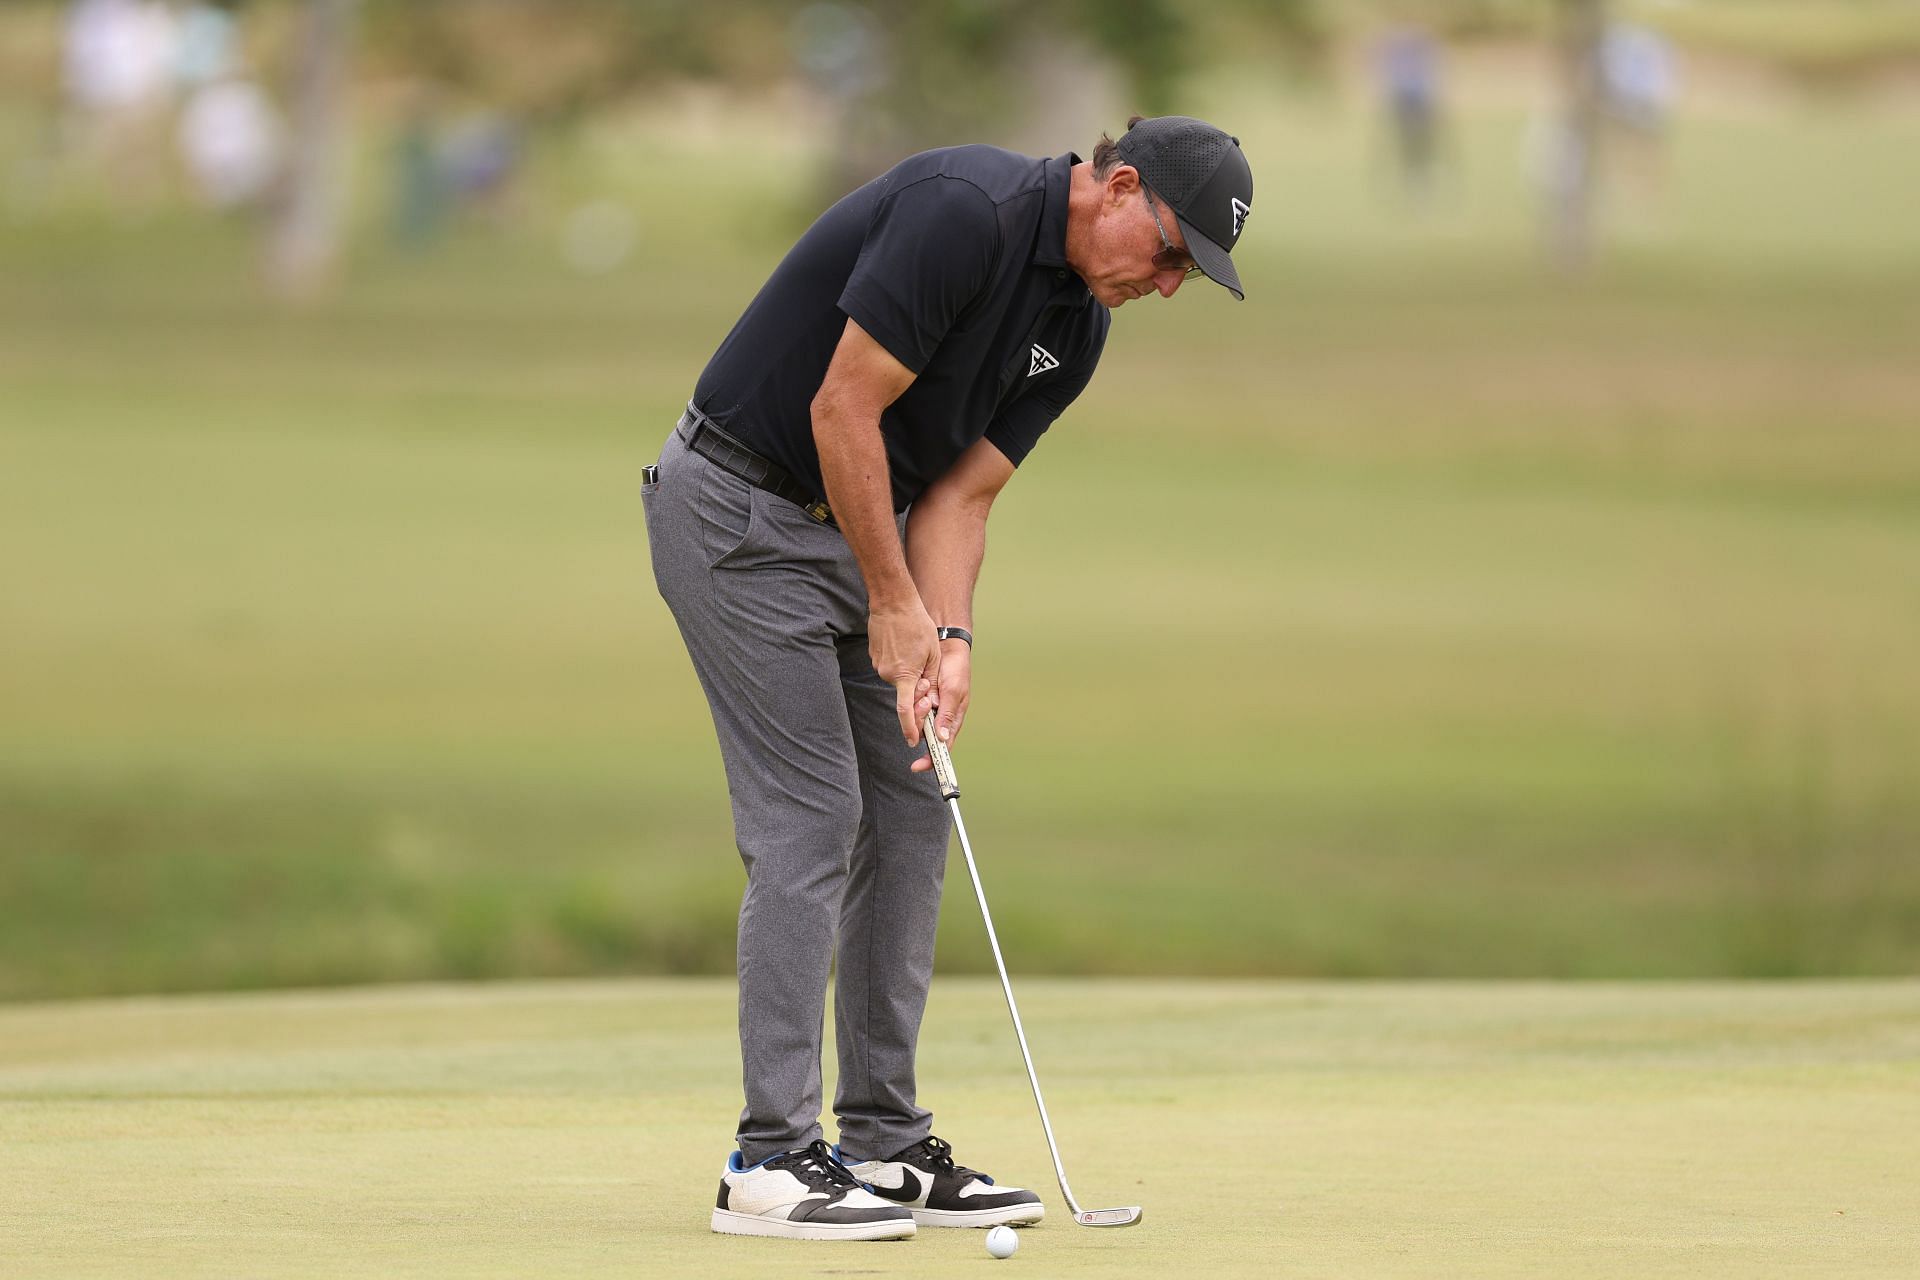 Phil Mickelson at the 2023 U.S. Open - Round One (Image via Getty).